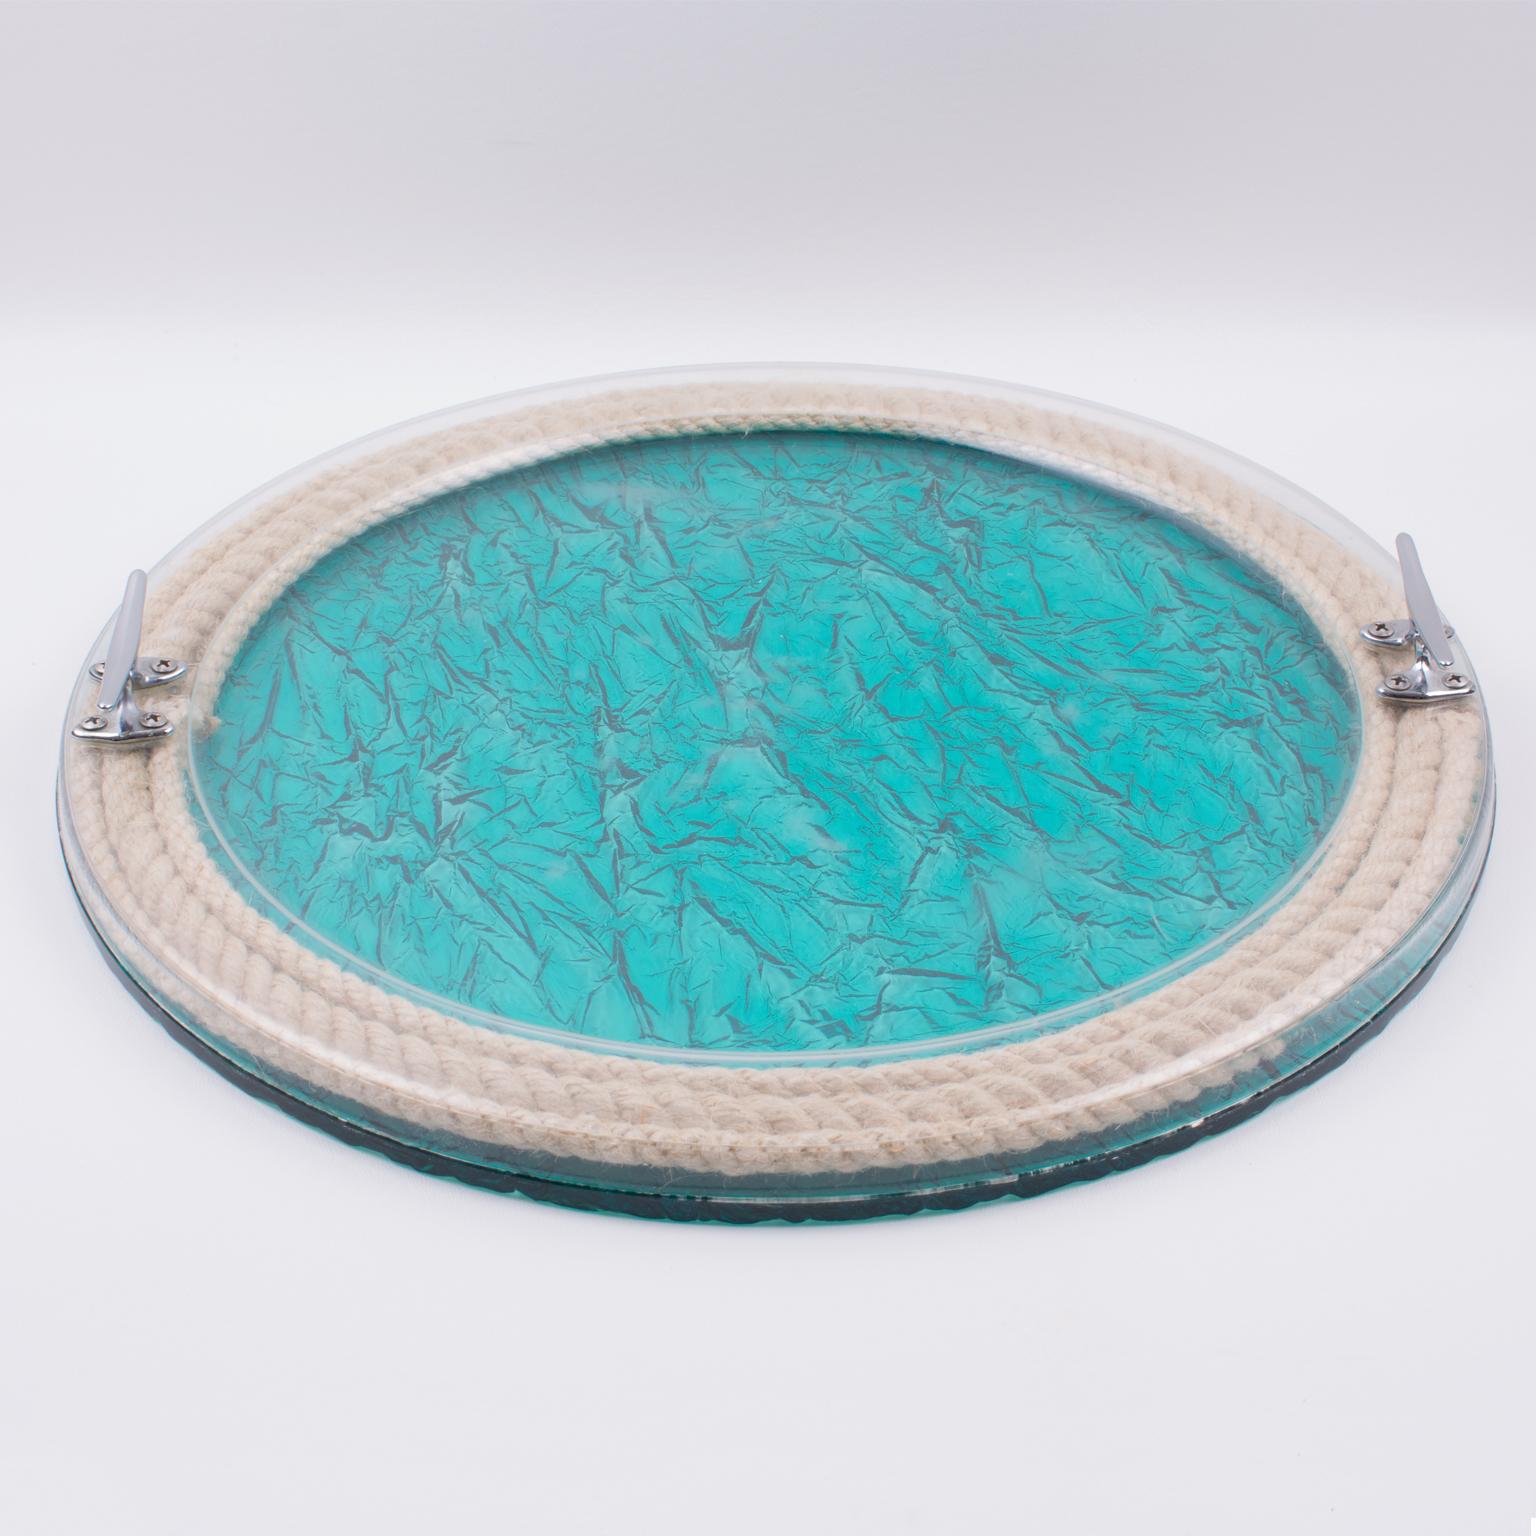 Elegant large barware serving tray designed for Christian Dior home collection, in the 1970s. Rounded shape with porthole design, featuring real rope embedded in the crystal clear Lucite, with chromed metal handles in a boat-fittings-like shape and